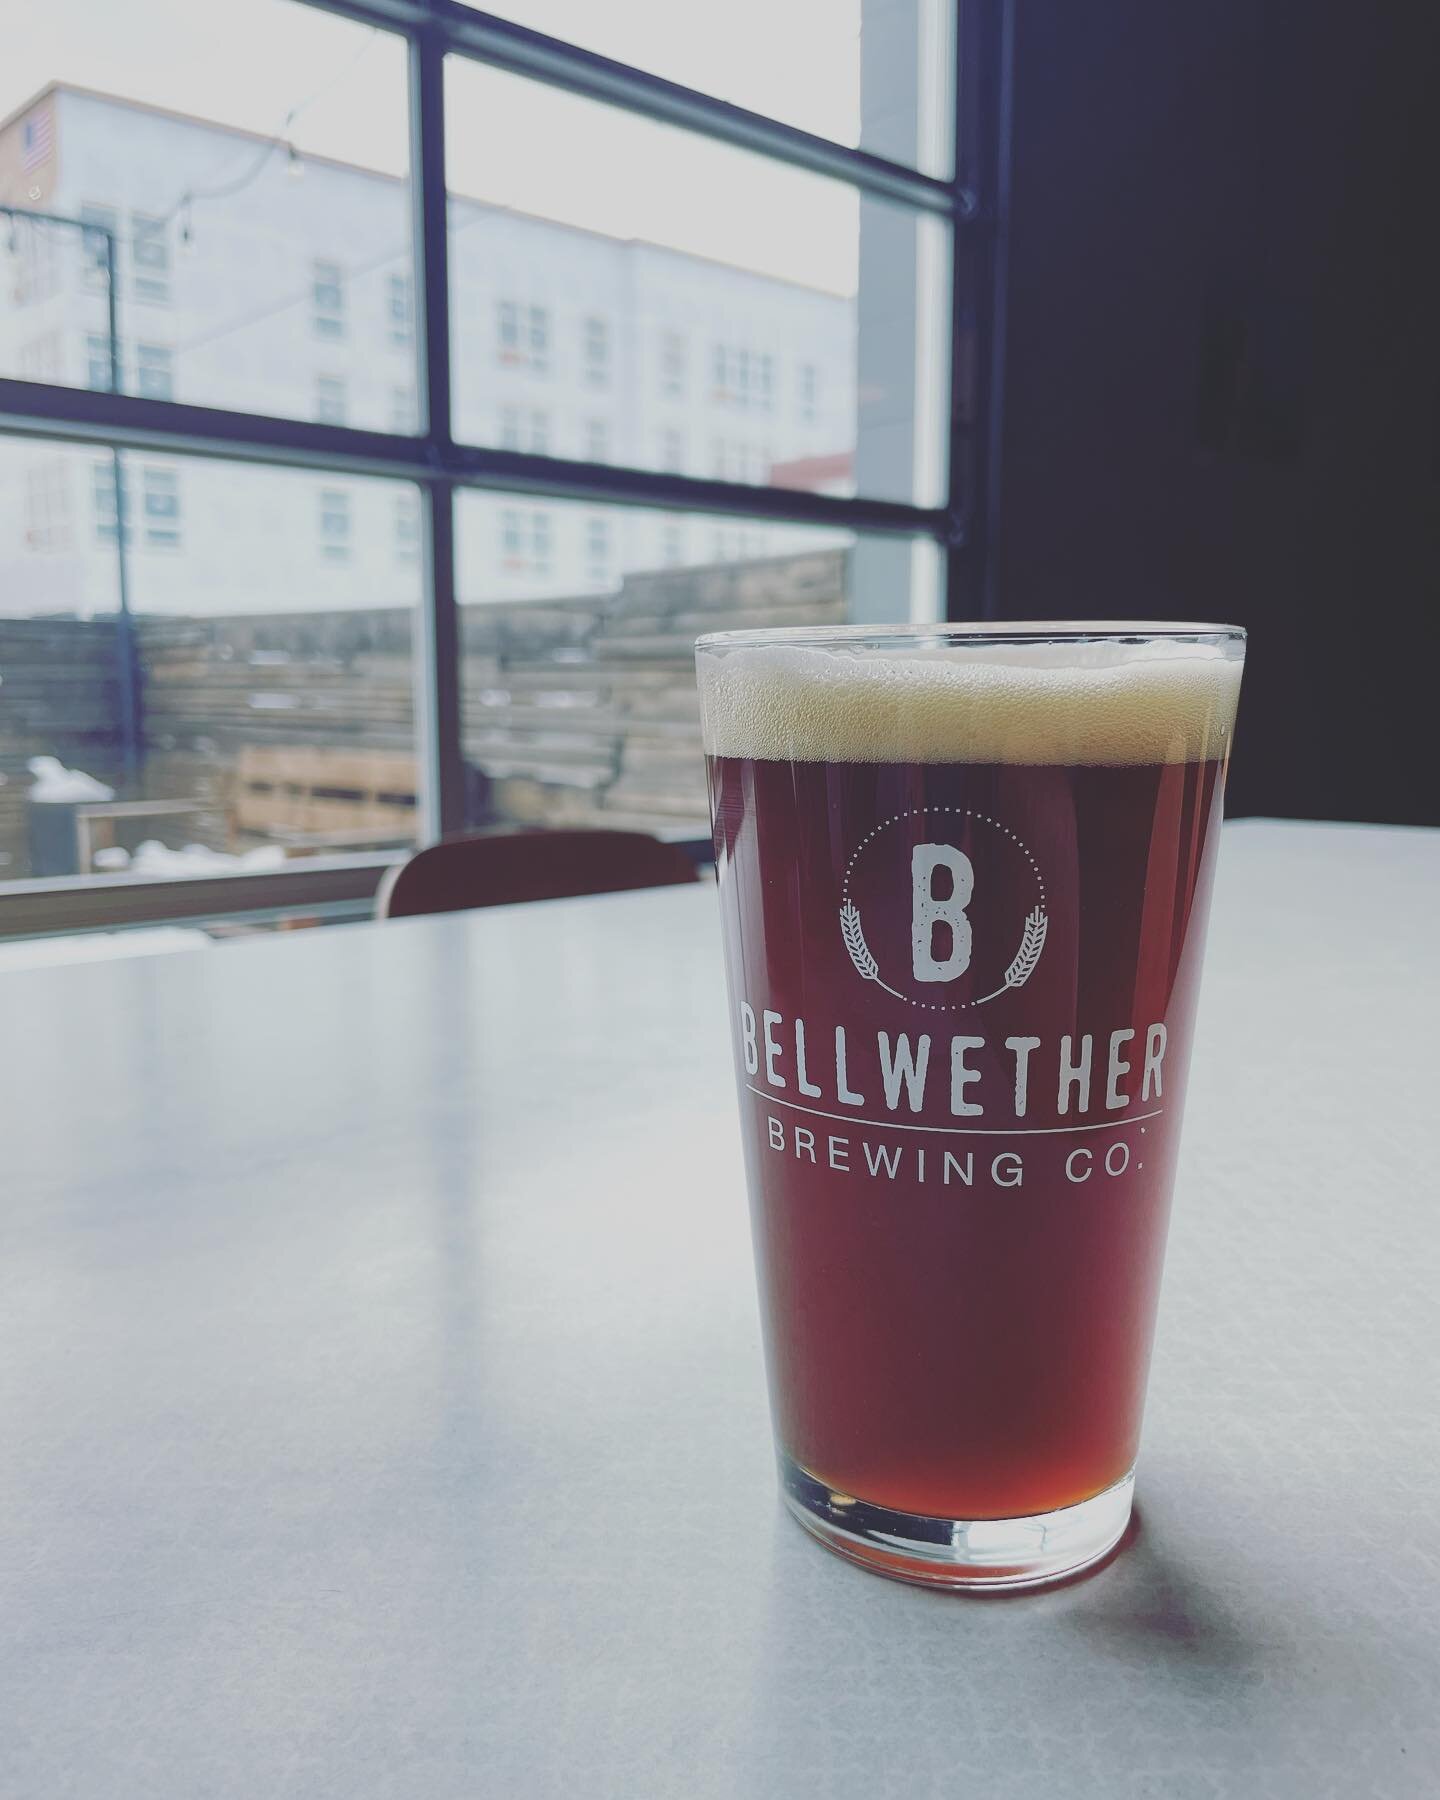 Today&rsquo;s Barrel Madness release is Journey&rsquo;s End - Barreled Red Ale. 

This beer has a malty nose, is mildly tart &amp; smooth with rich wood notes from the @westlandwhiskey barrel &amp; finishes dry. 
.
Prost!
.
.
#bellwetherbrewing #spok